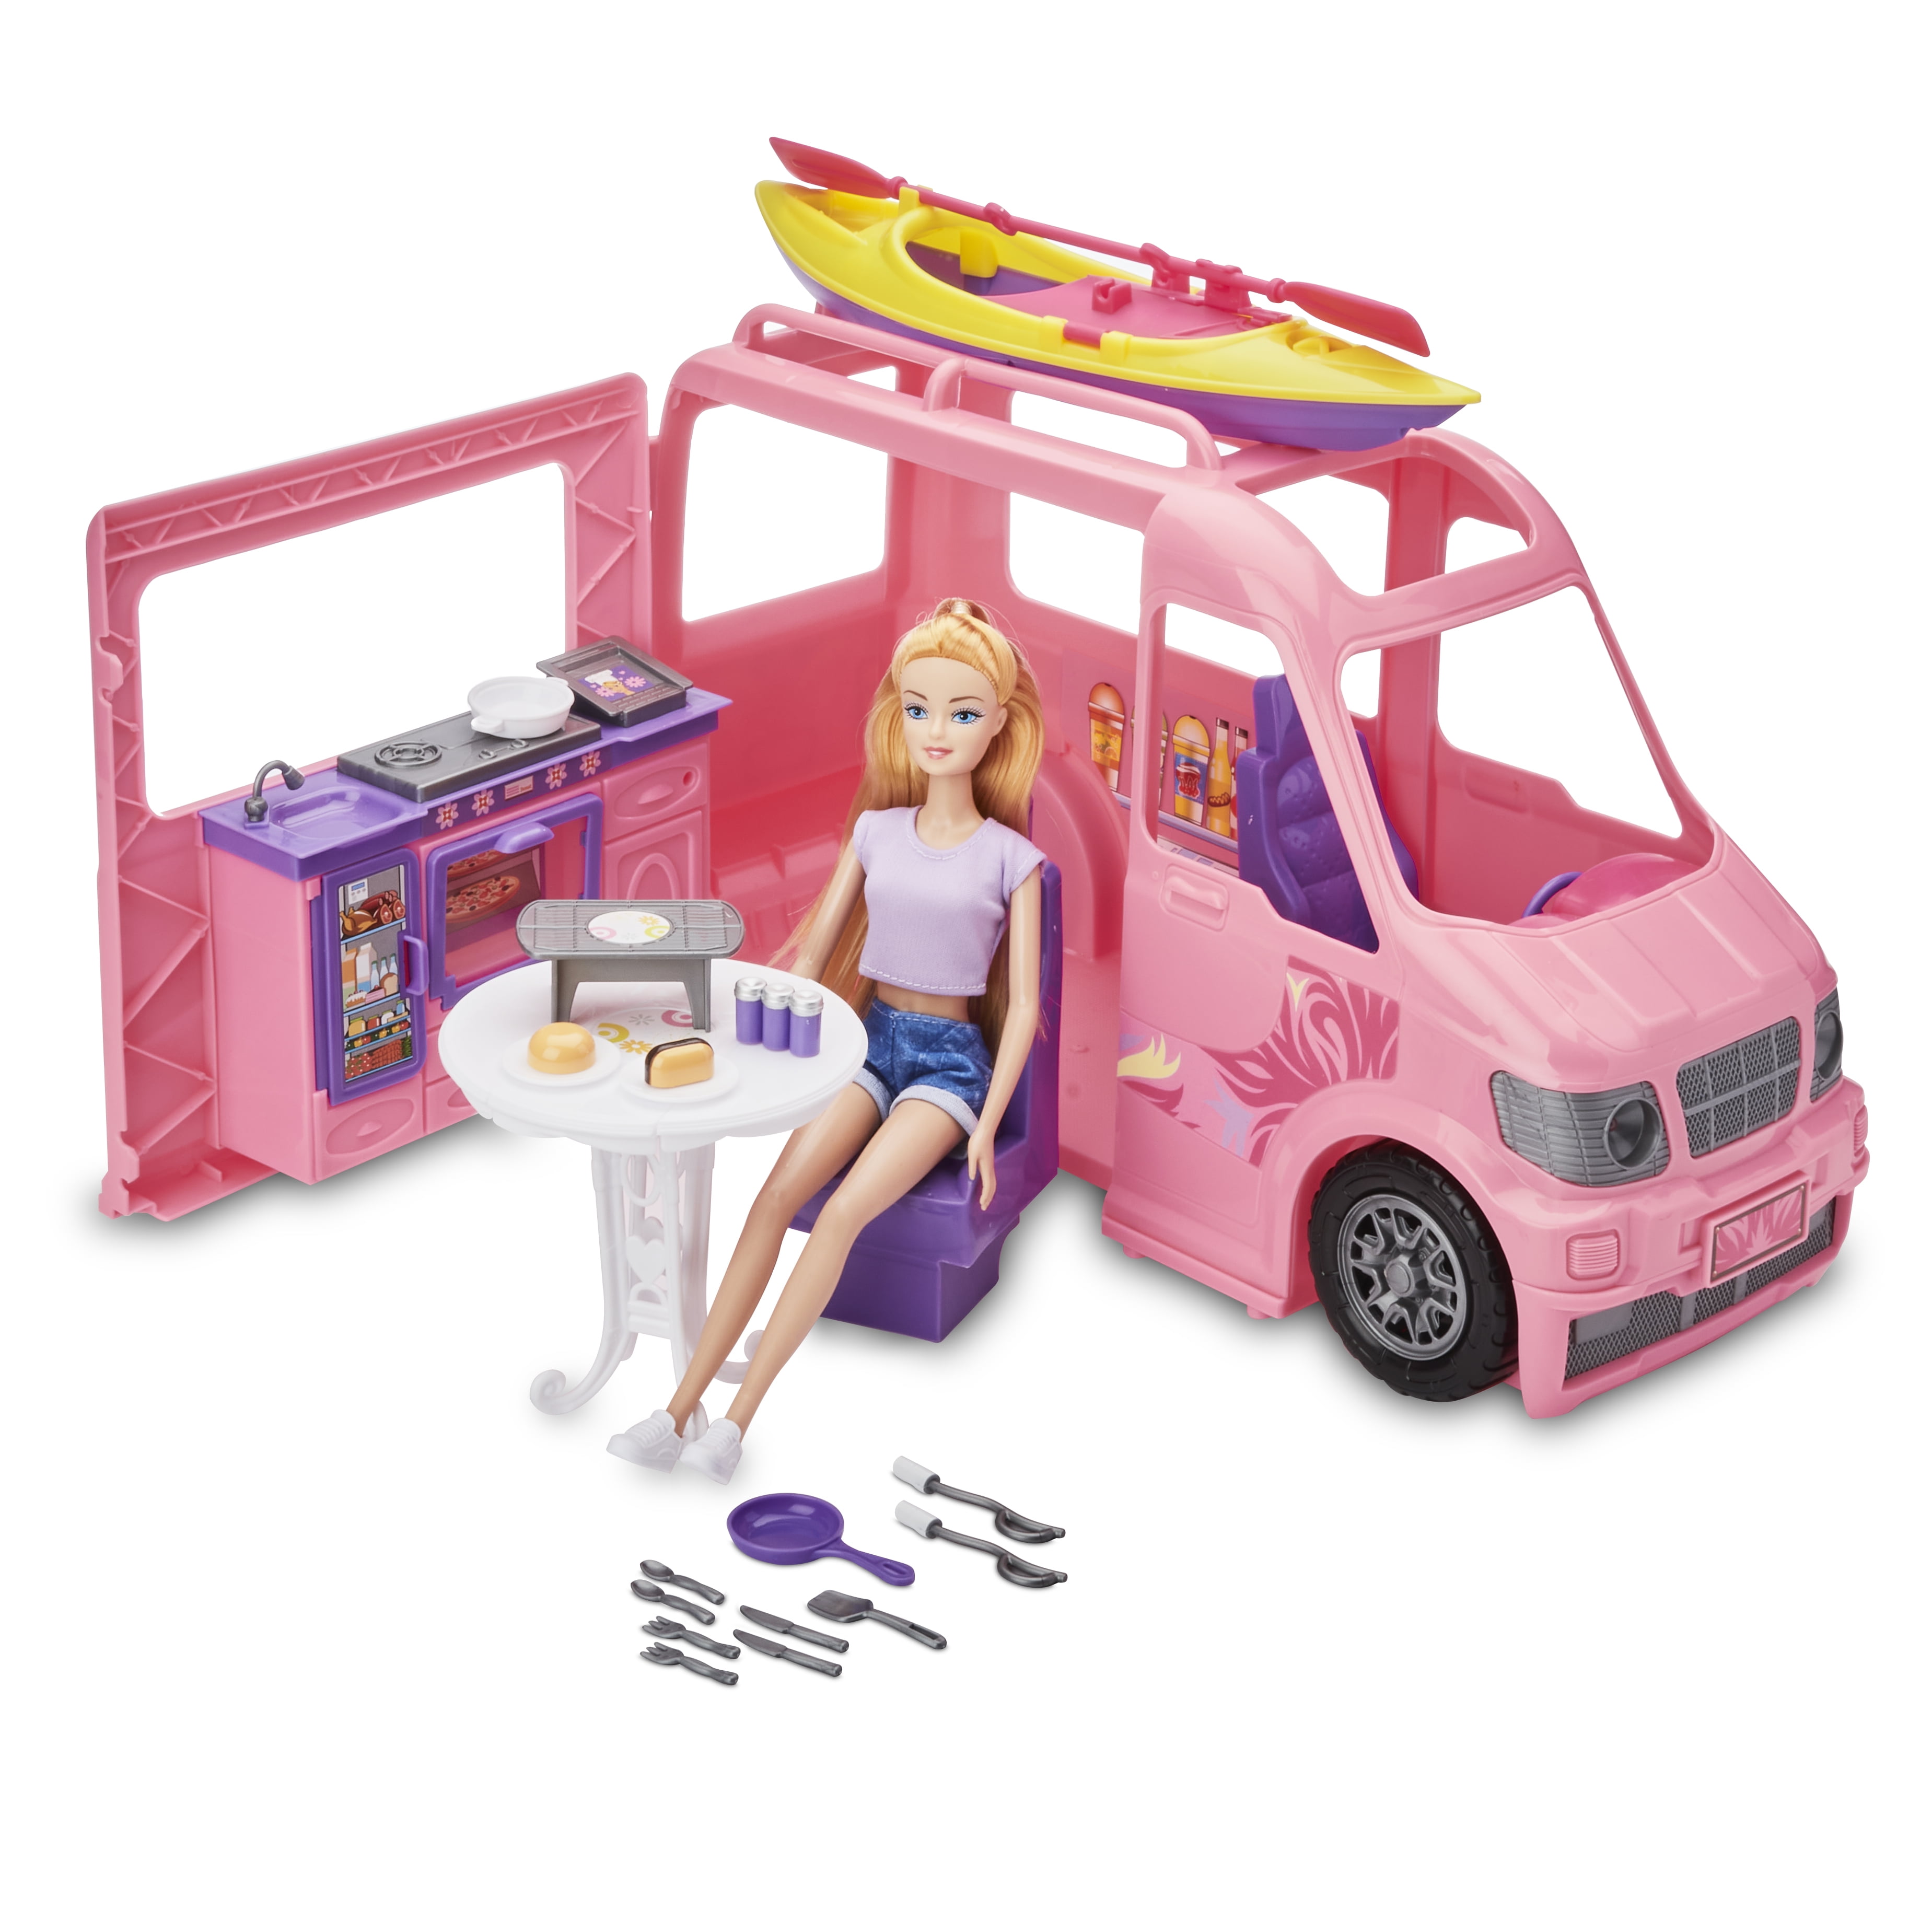 Kid Connection Camper with 11.5" Doll Play Set, 22 Pieces Walmart.com